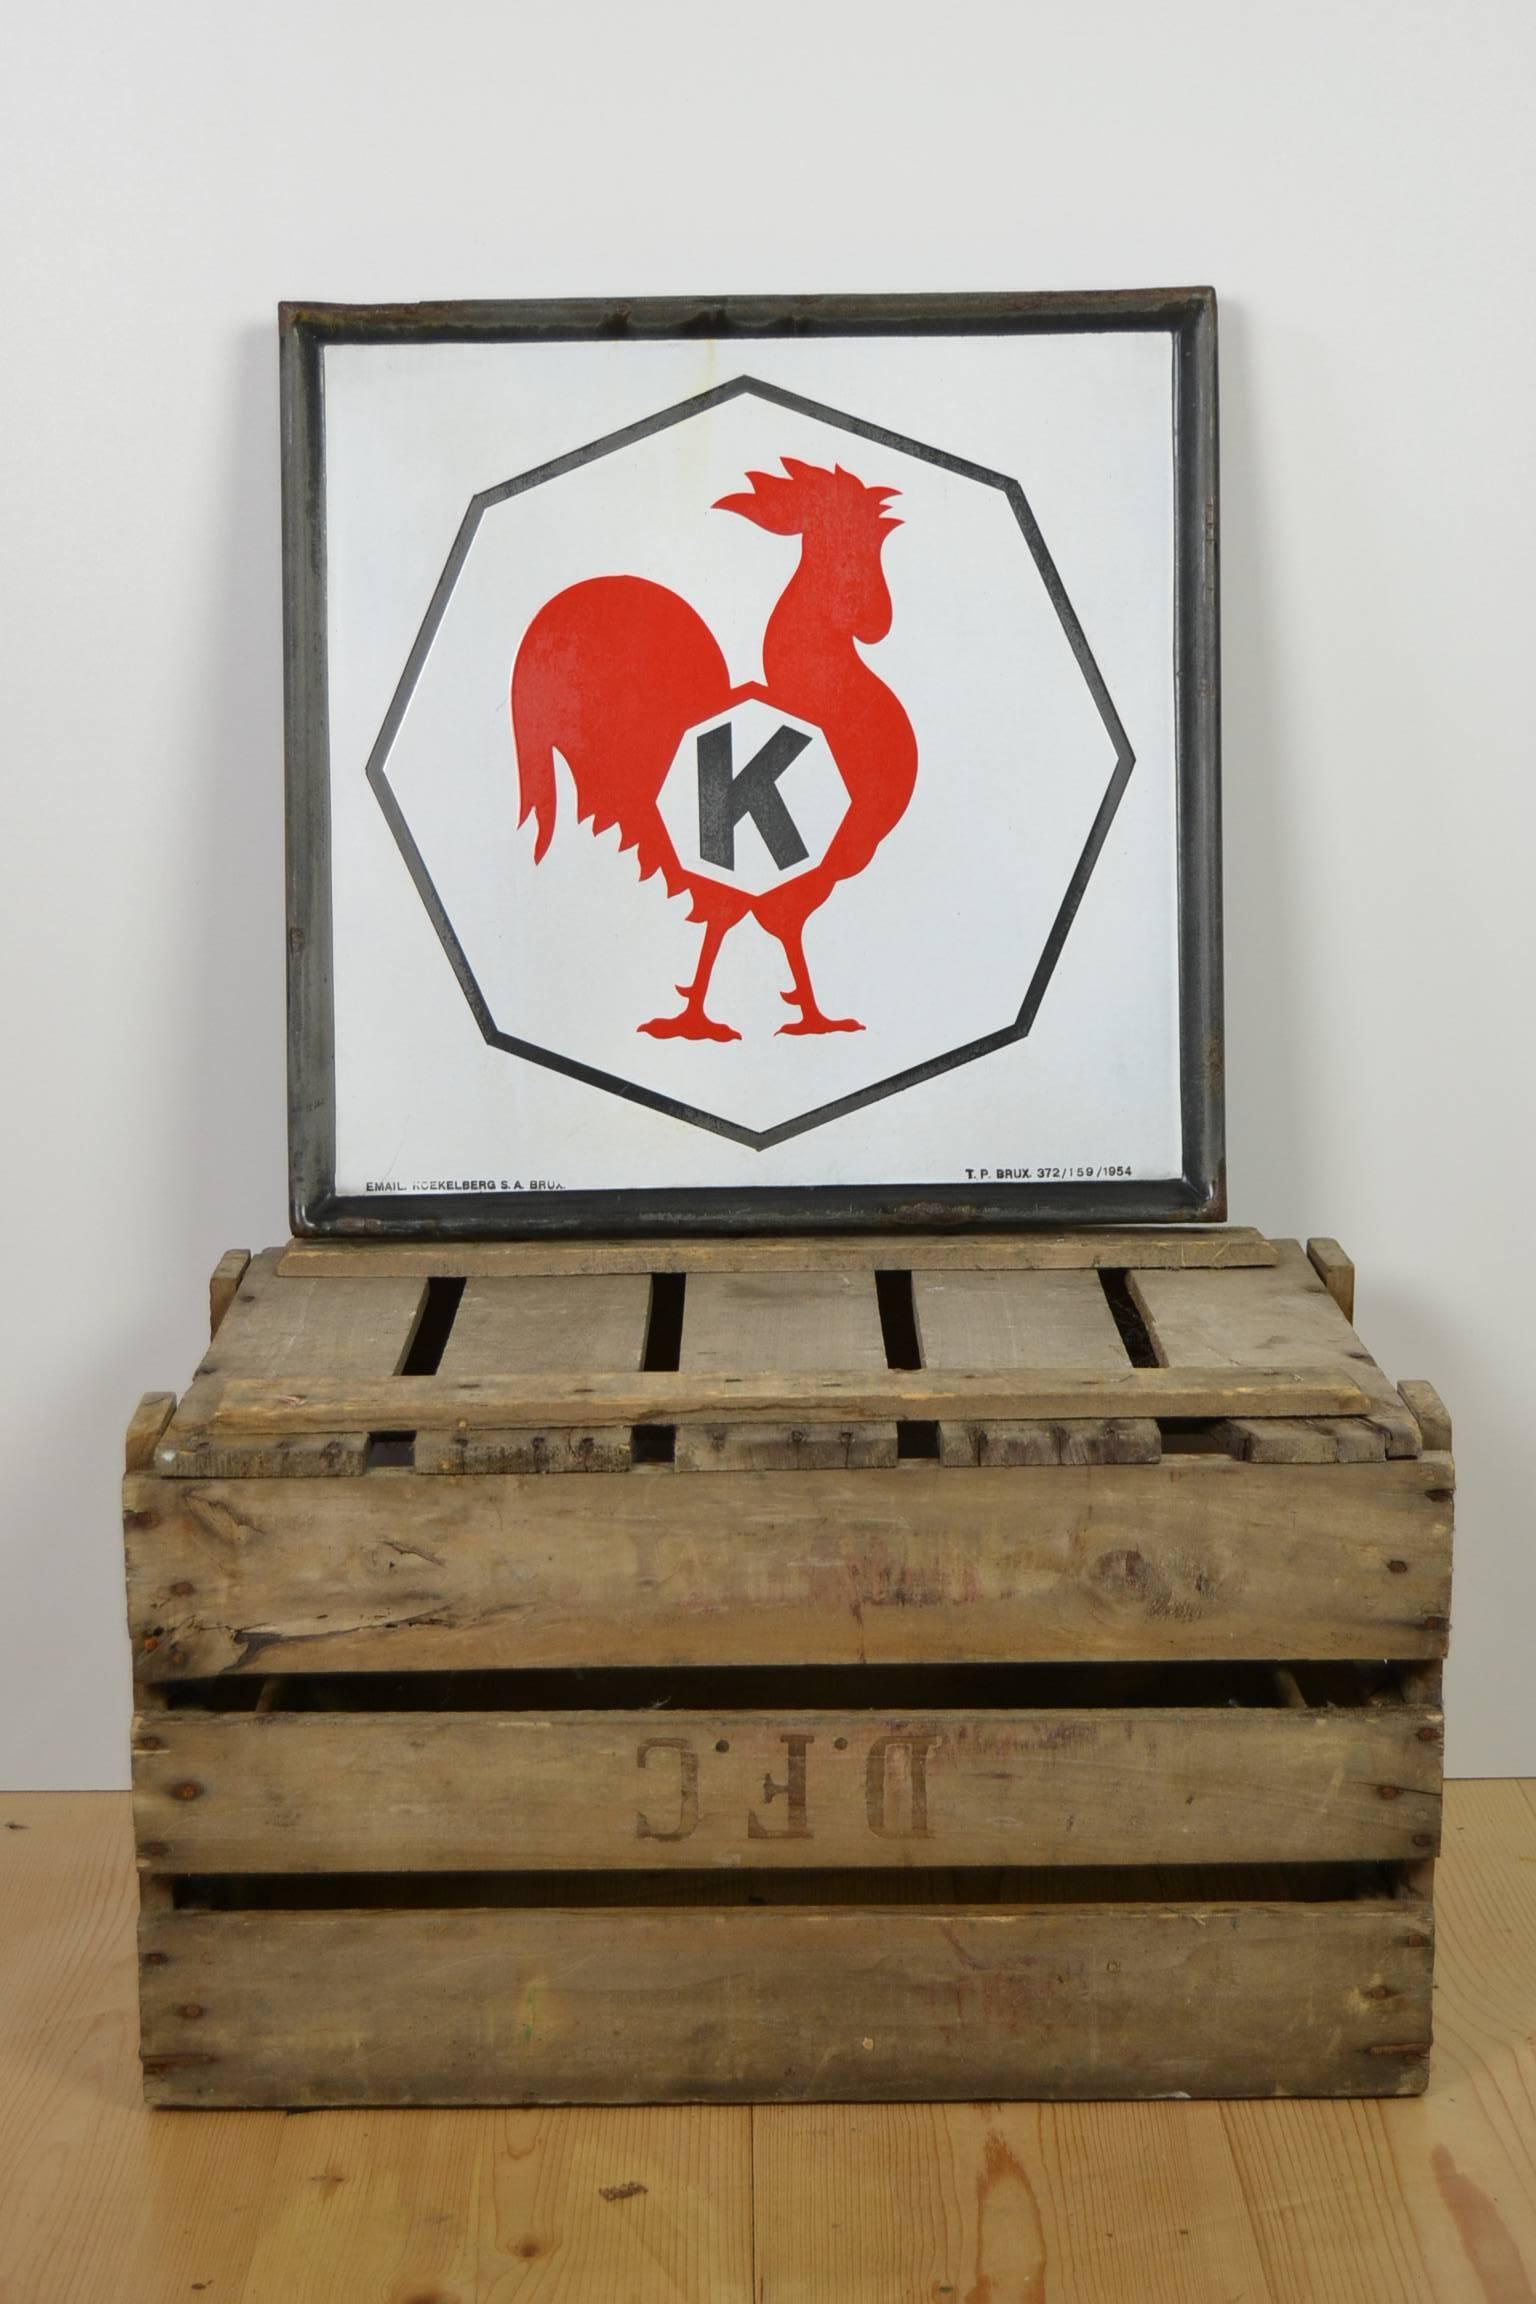 Exceptional enamel sign, retro wall decoration, interior idea
for home, kitchen, restaurant business.
Square white enamel sign with red rooster- cock. 
Made by Emaillerie Koekelberg, Brussels, taxes paid in 1954.
  